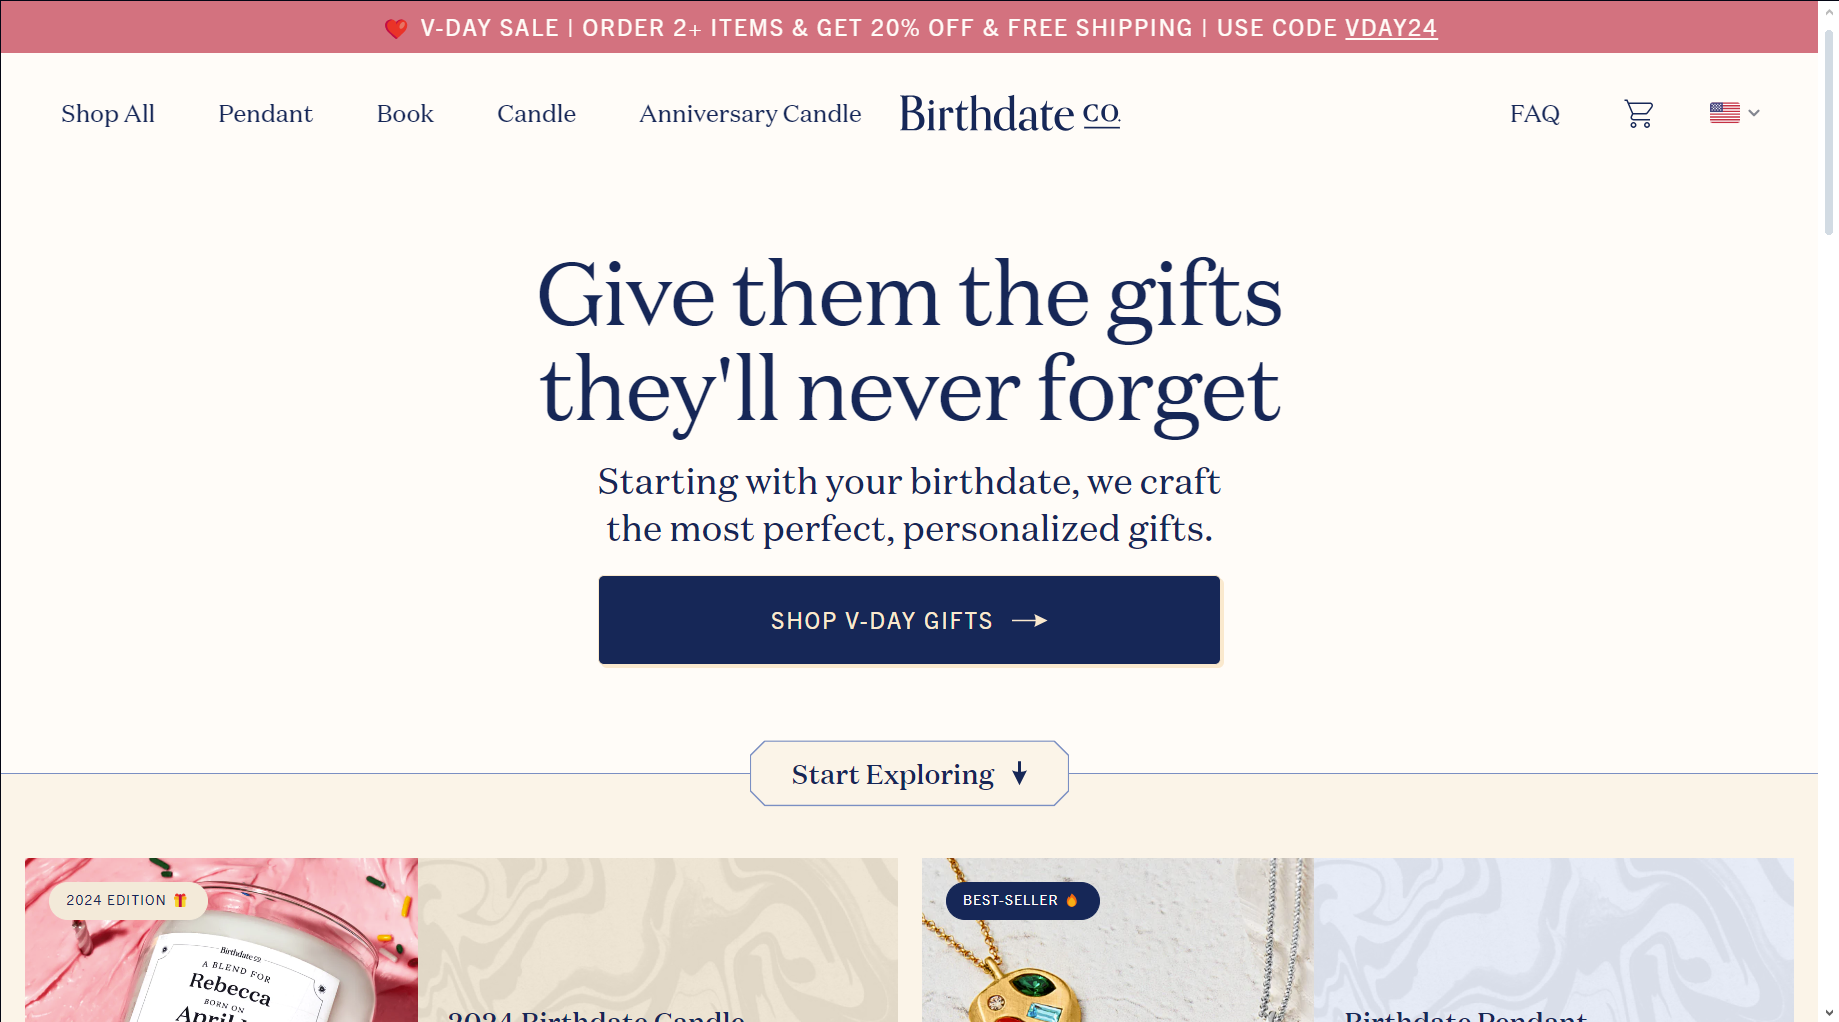 Visit Birthdate Co for Awesome Valentine’s Day Deals